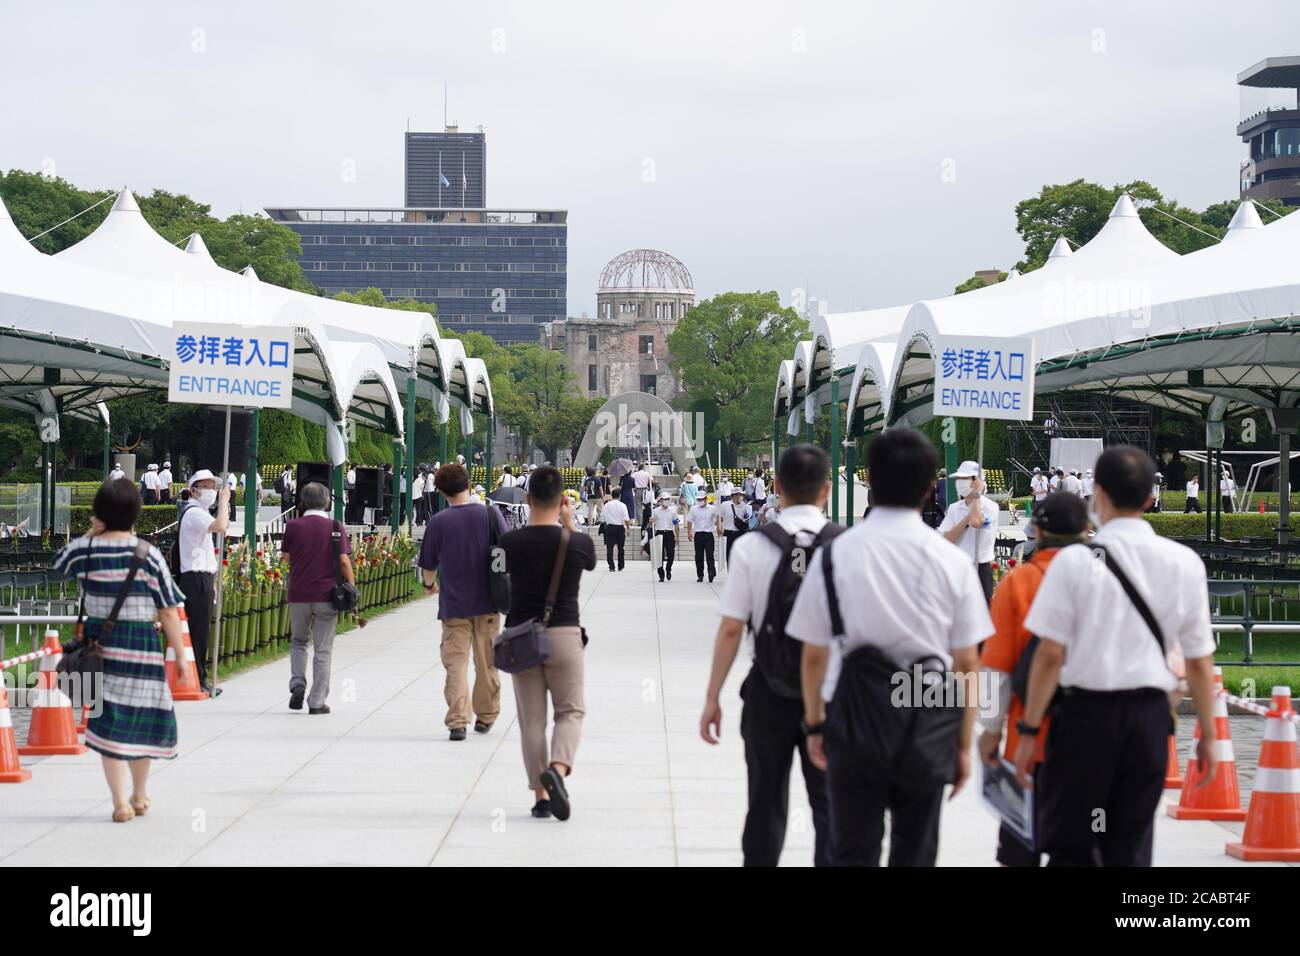 People at the Hiroshima Peace Memorial Ceremony.Hiroshima marks the 75th anniversary of the U.S. atomic bombing which killed about 150,000 people and destroyed the entire city during World War II. Stock Photo